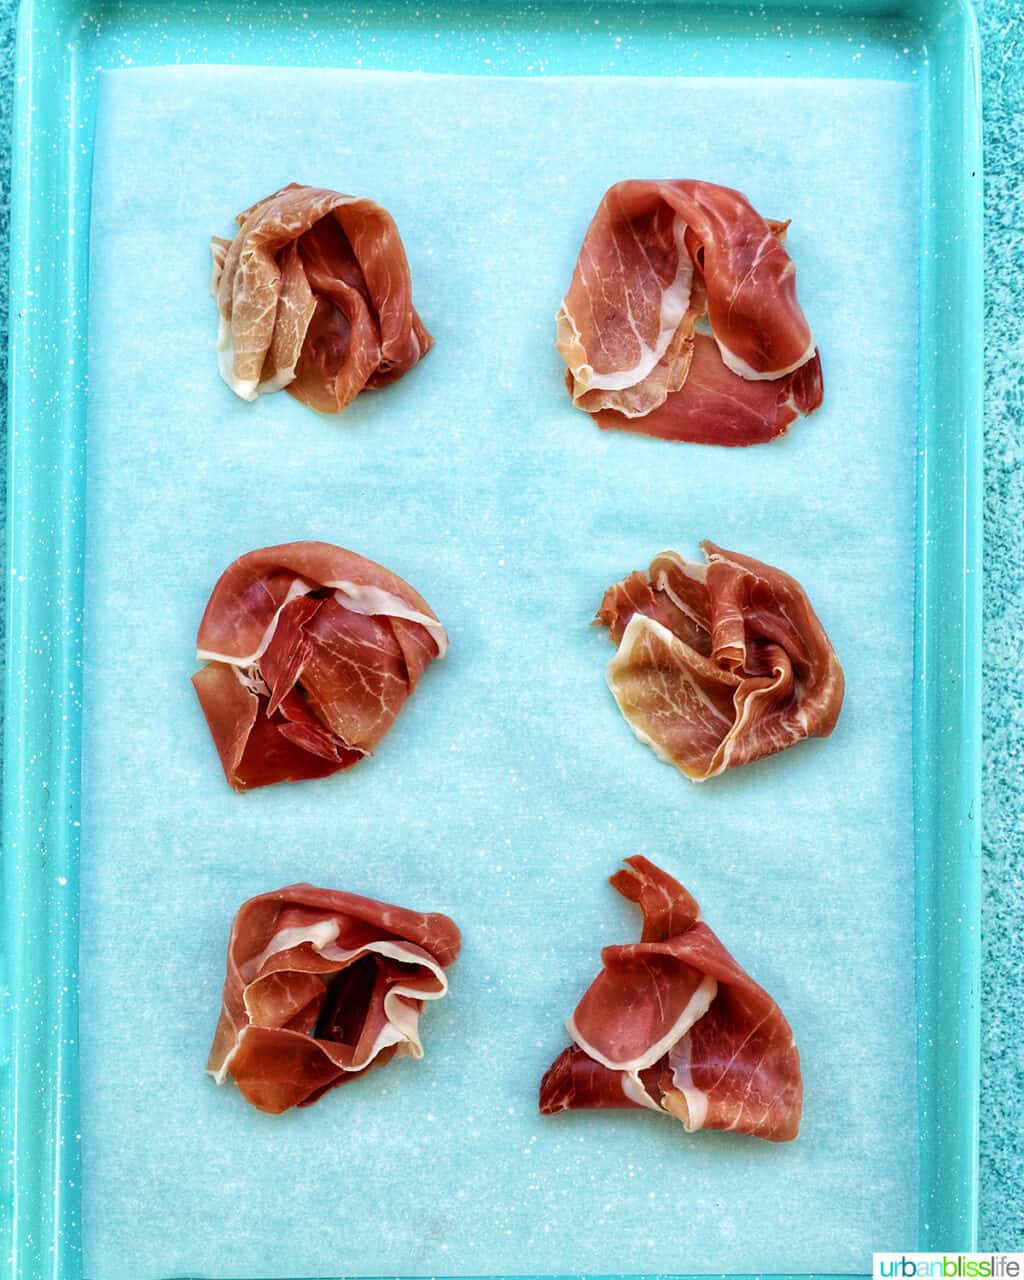 six crispy prosciutto rounds on a blue baking tray.